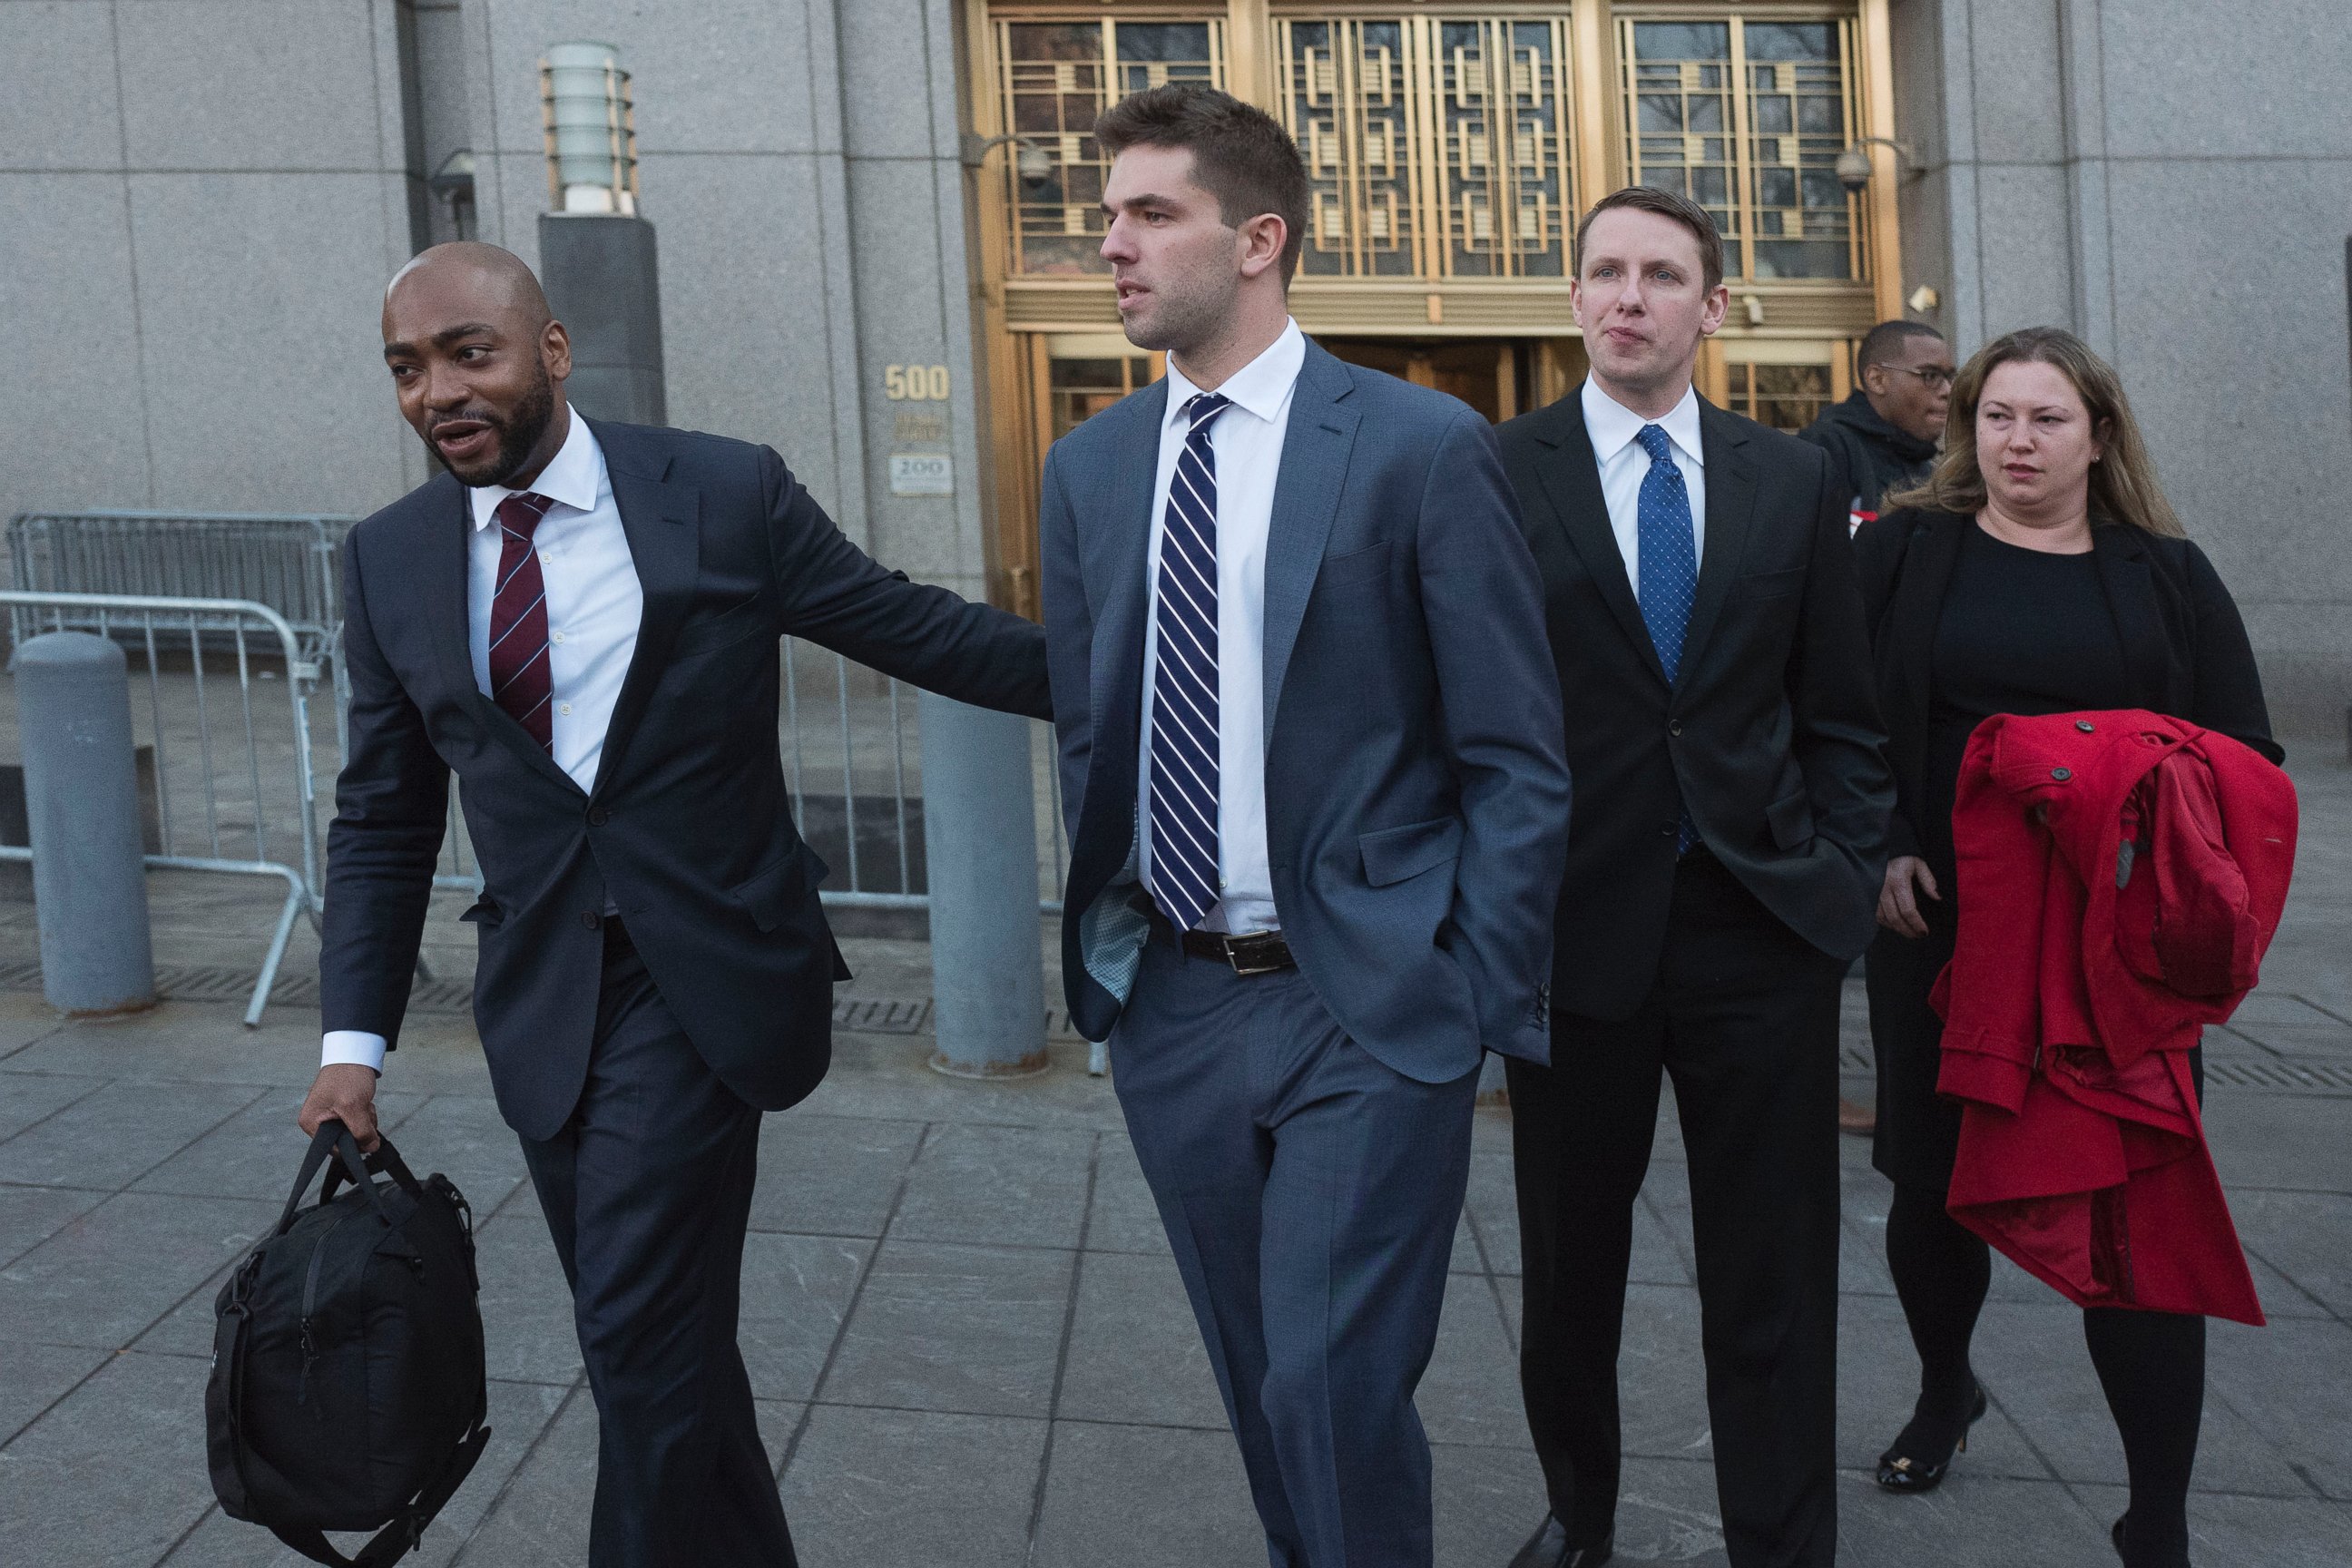 Billy McFarland, center, accompanied by his attorney Randall Jackson, left, leaves federal court after pleading guilty to wire fraud charges, Tuesday, March 6, 2018, in New York.